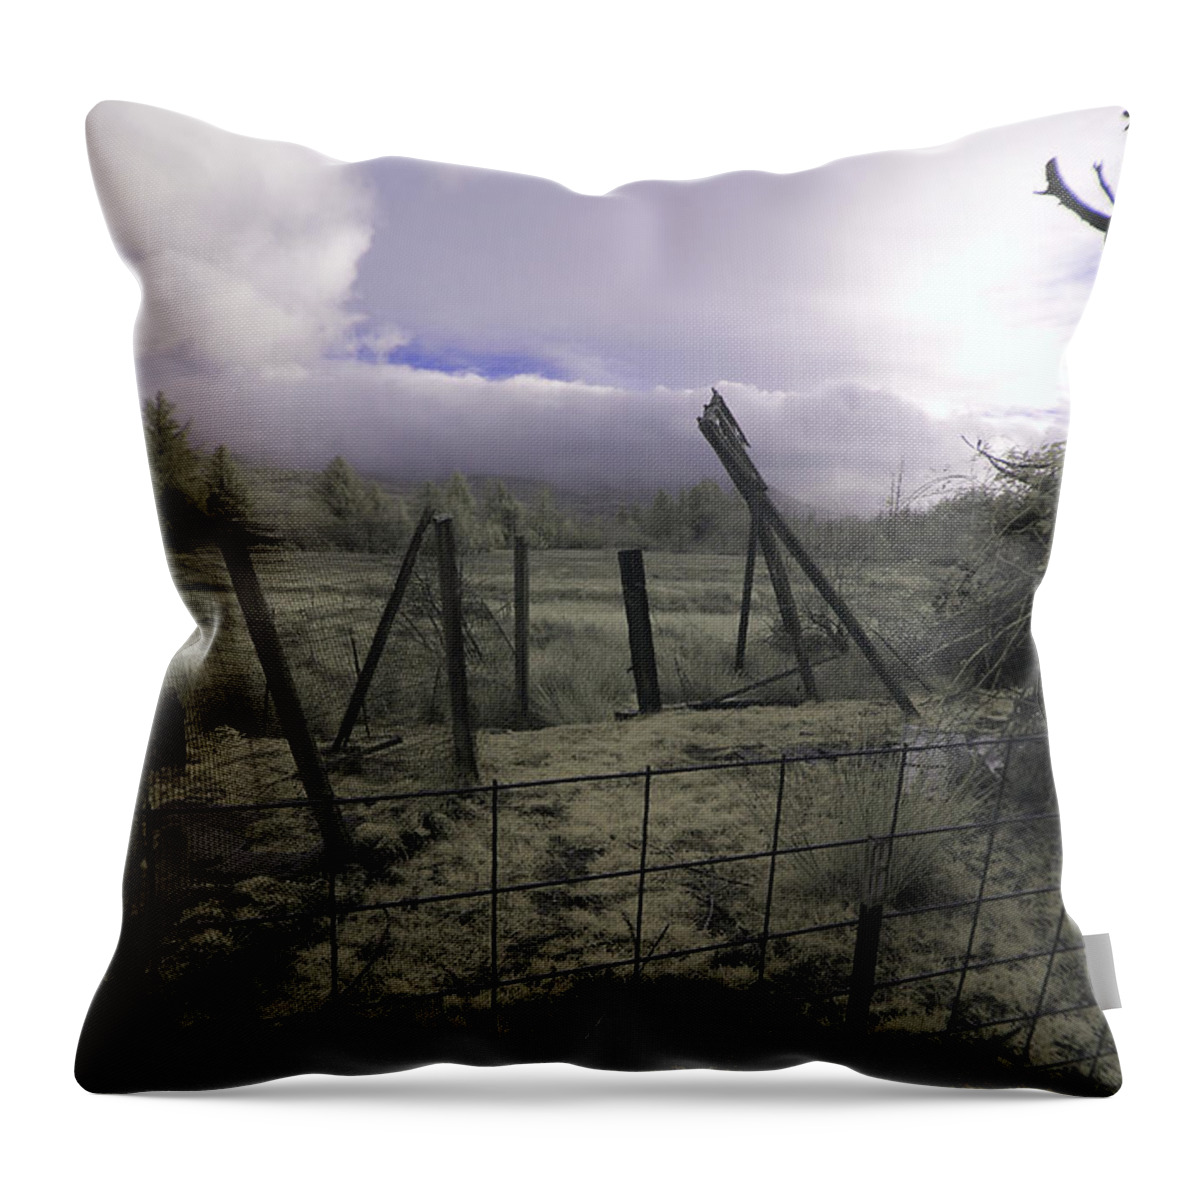 Storm Throw Pillow featuring the photograph Post Storm by Chriss Pagani